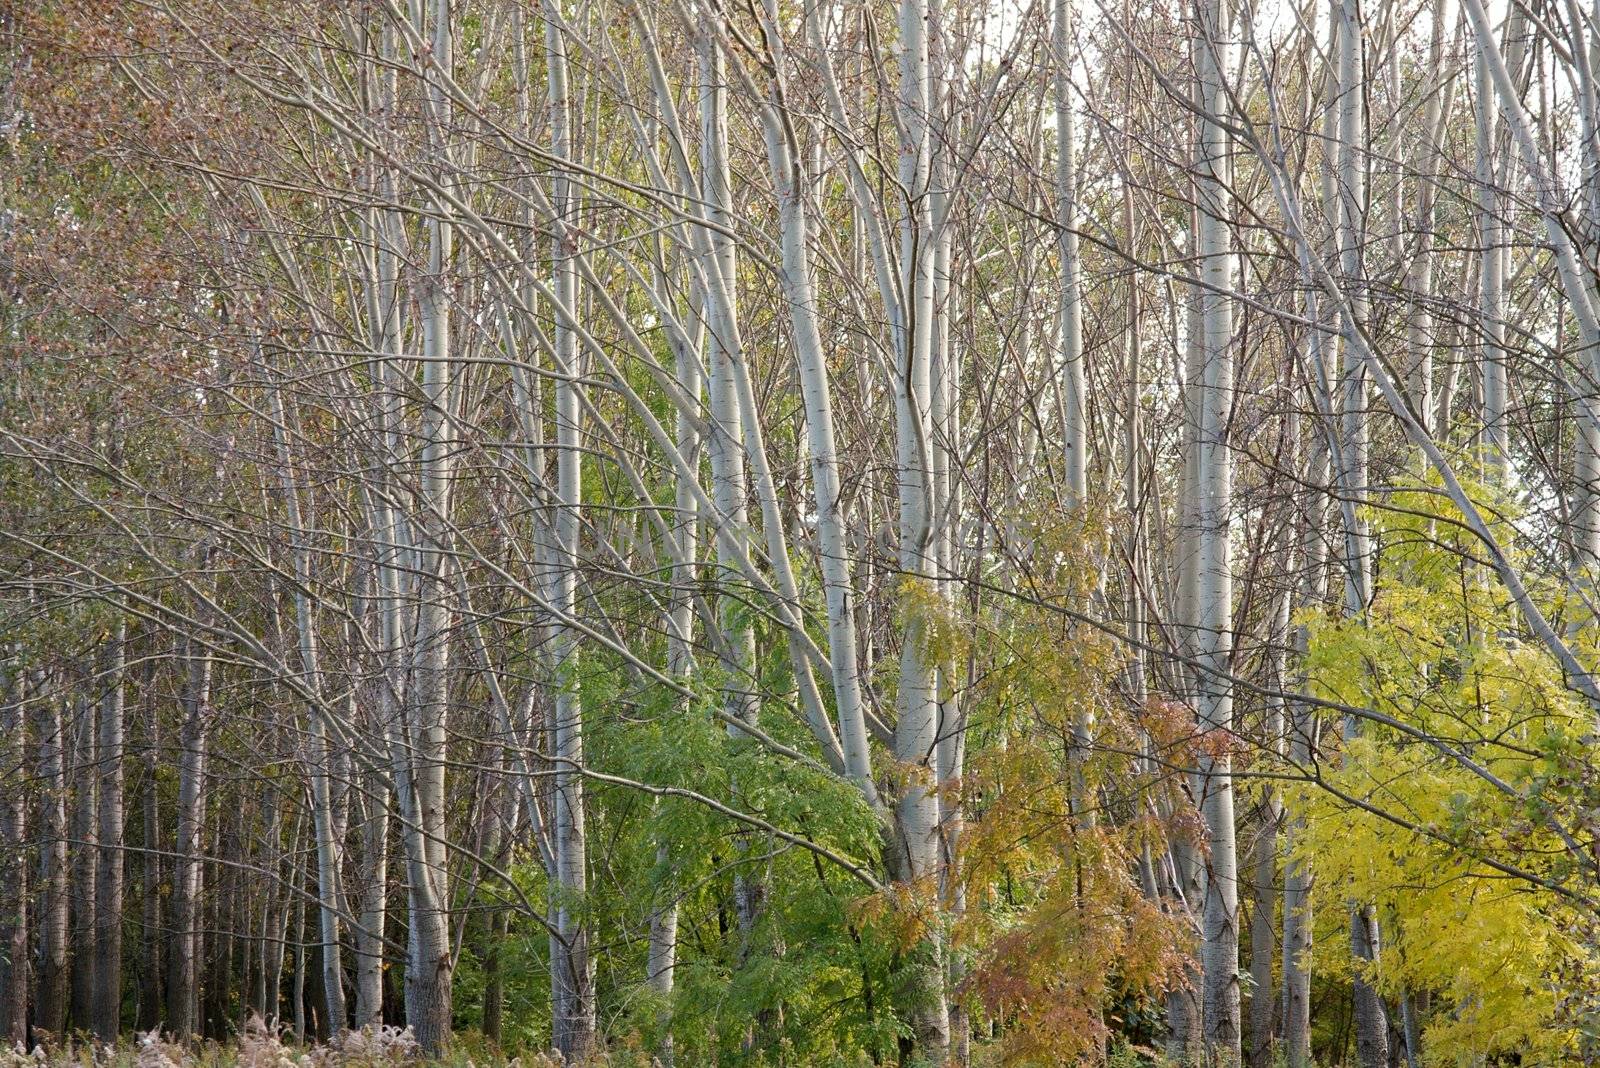 Trees of a forest in autumn